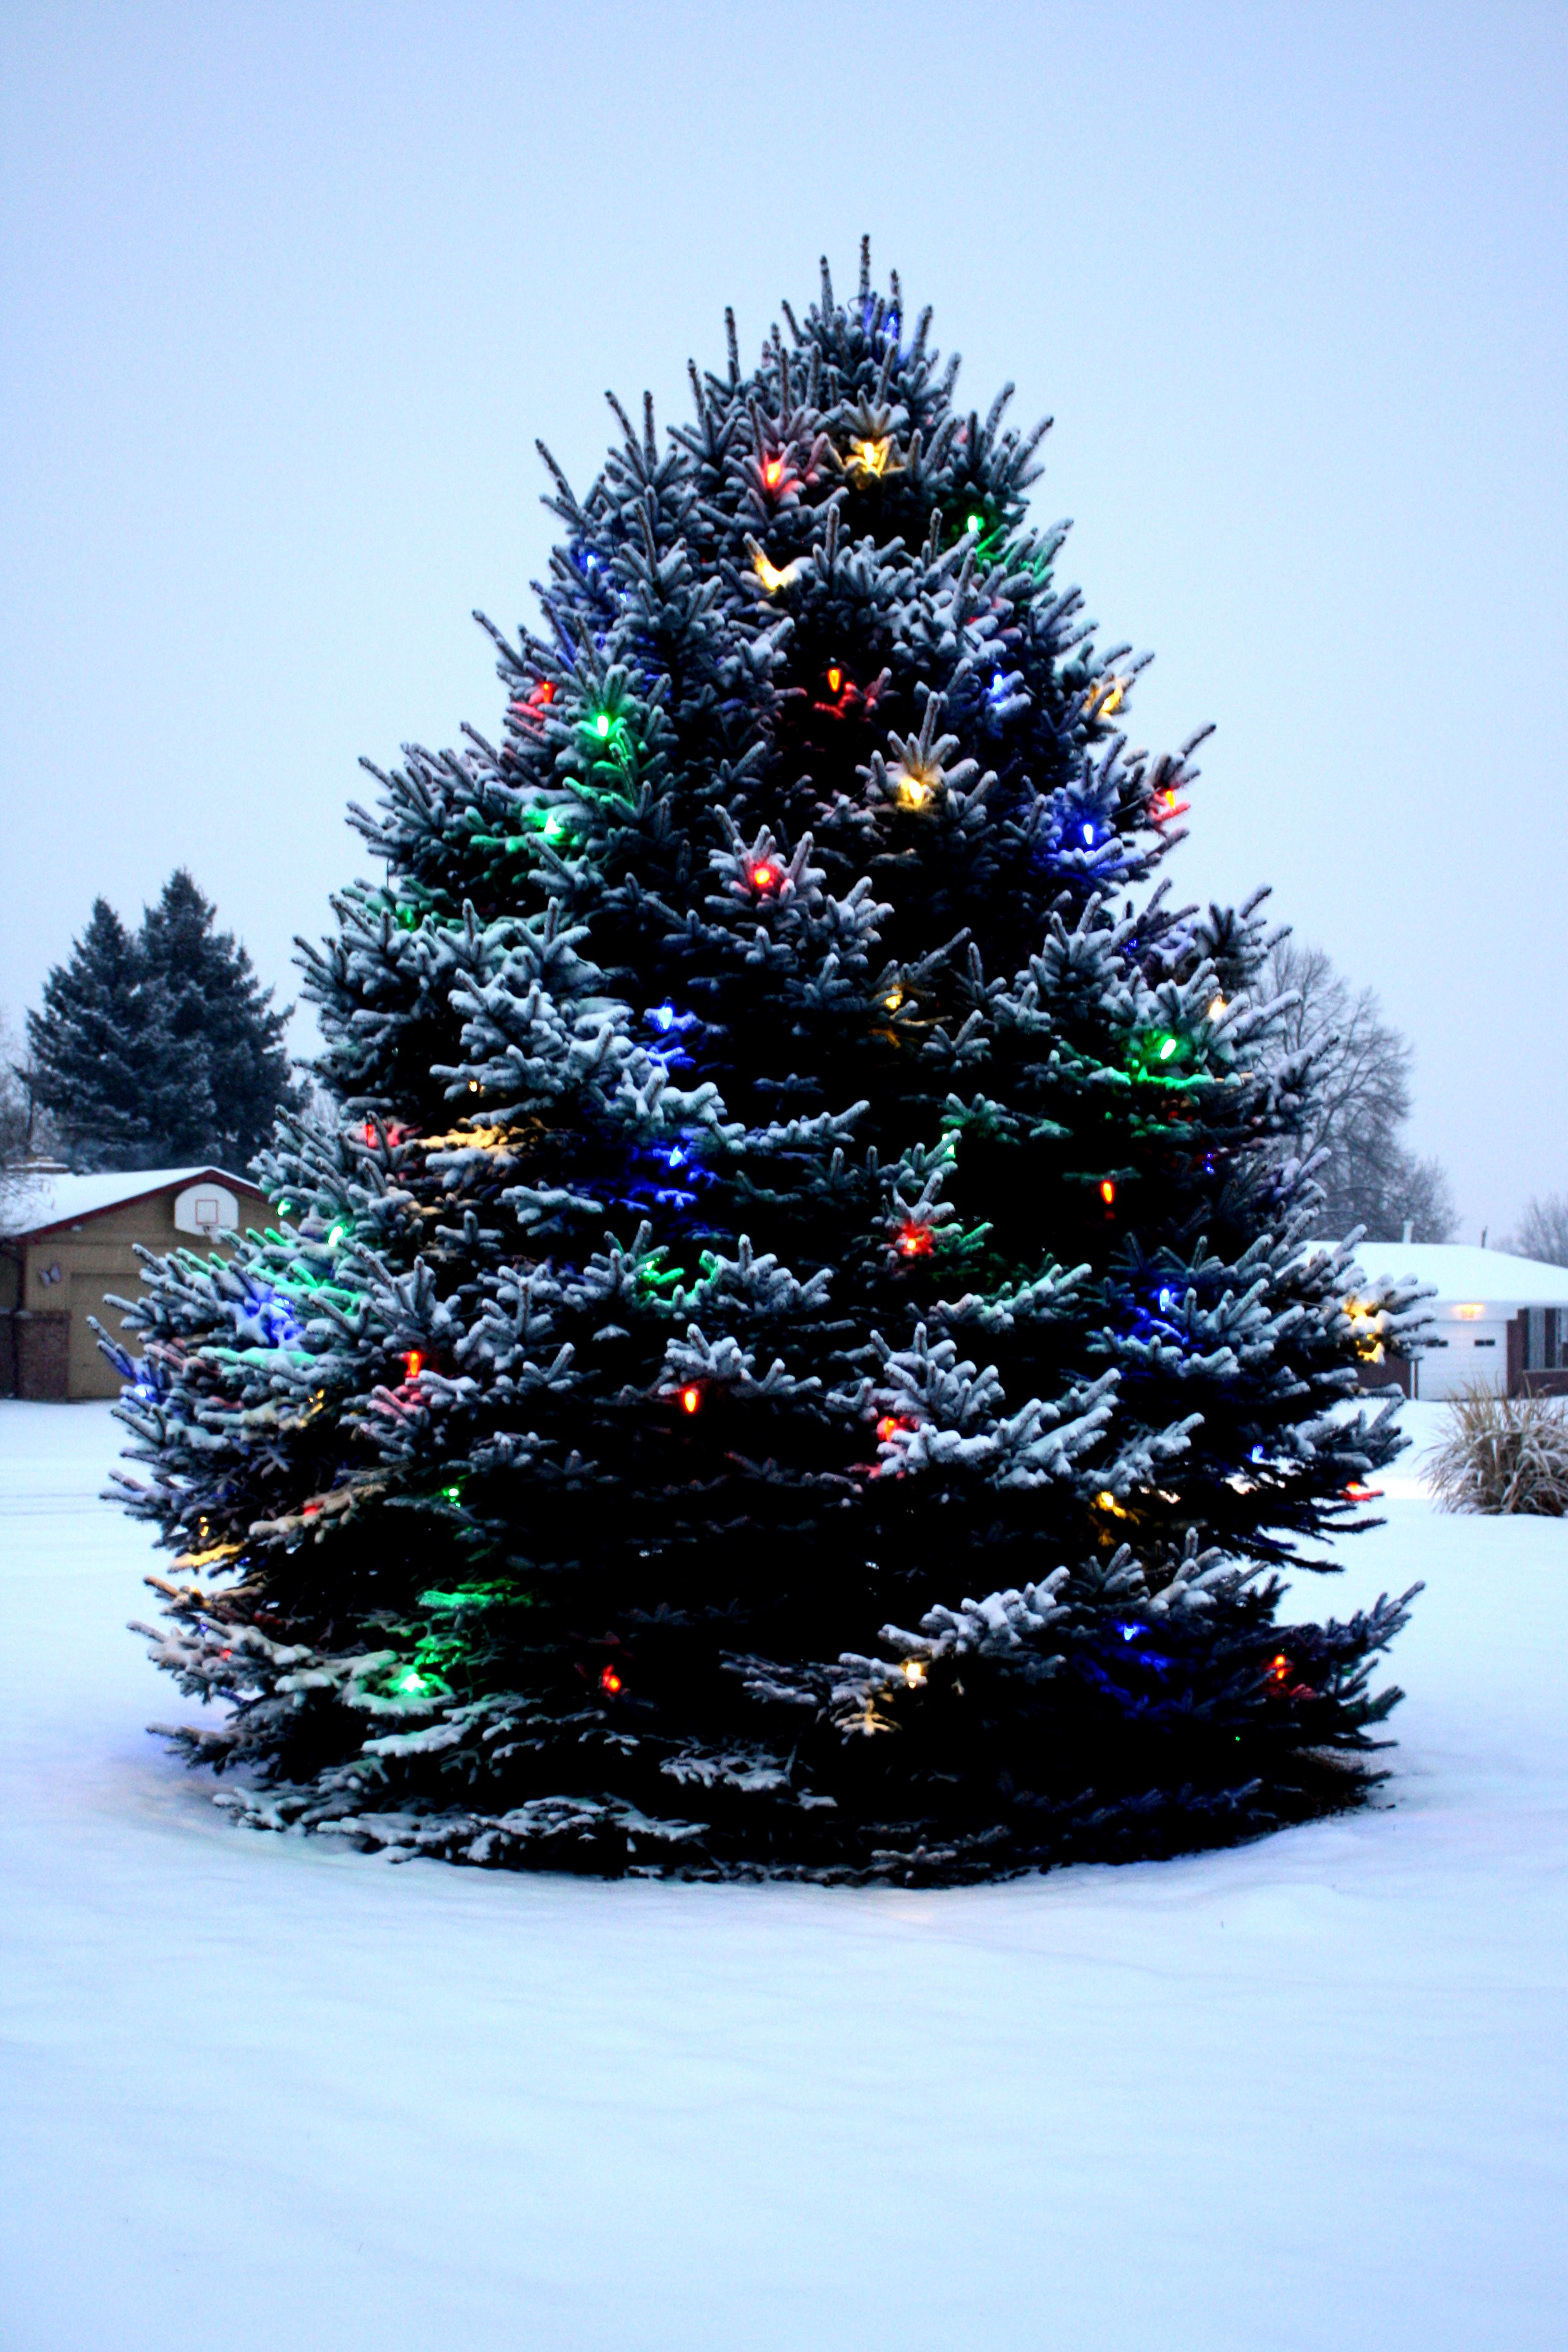 Outdoor Christmas Trees Lights
 How to install safety Christmas lights on outdoor trees